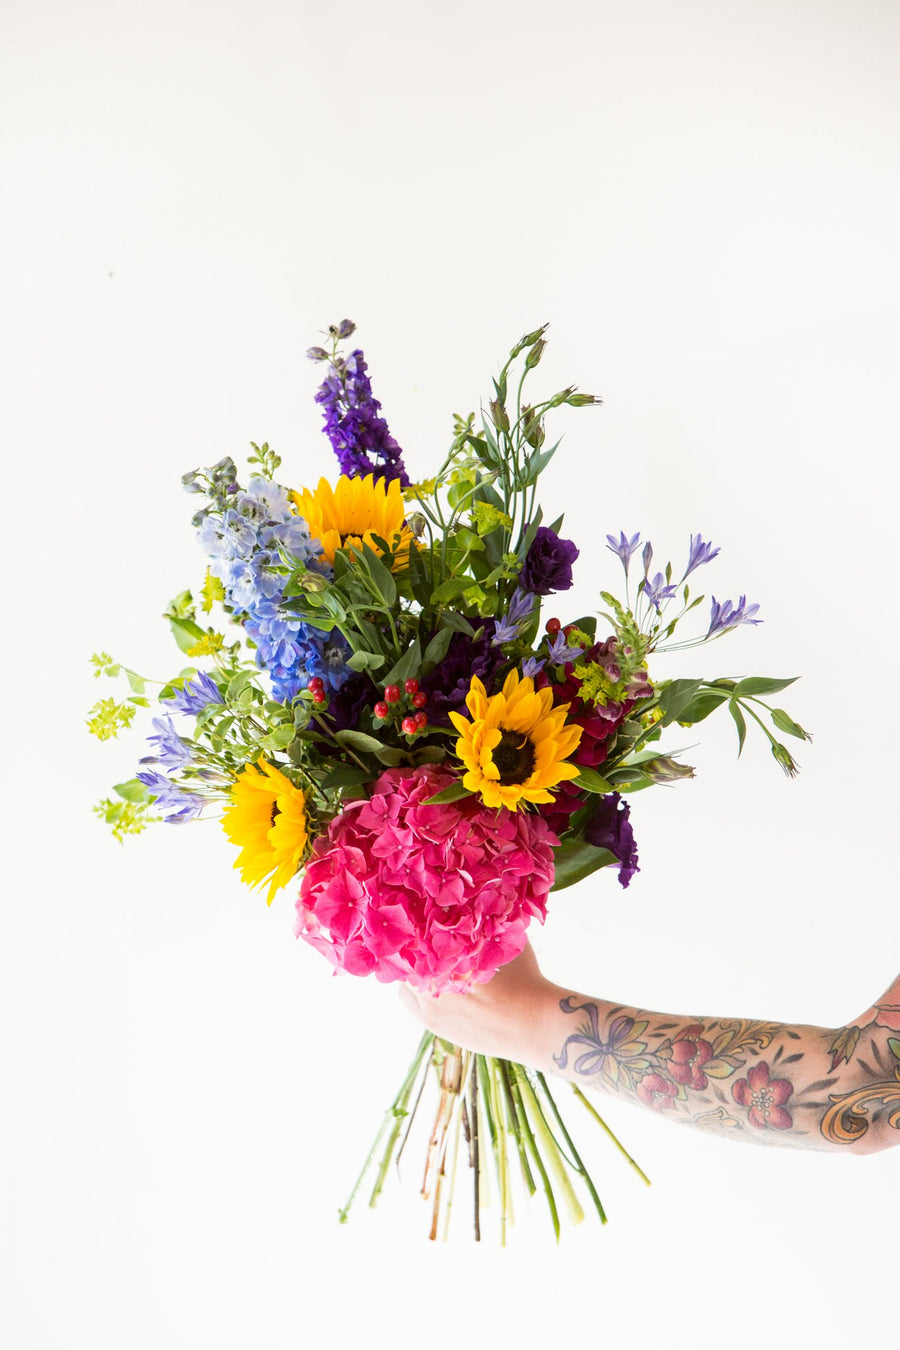 Floral Subscription Bright and Colorful handed arrangement - extra large $150